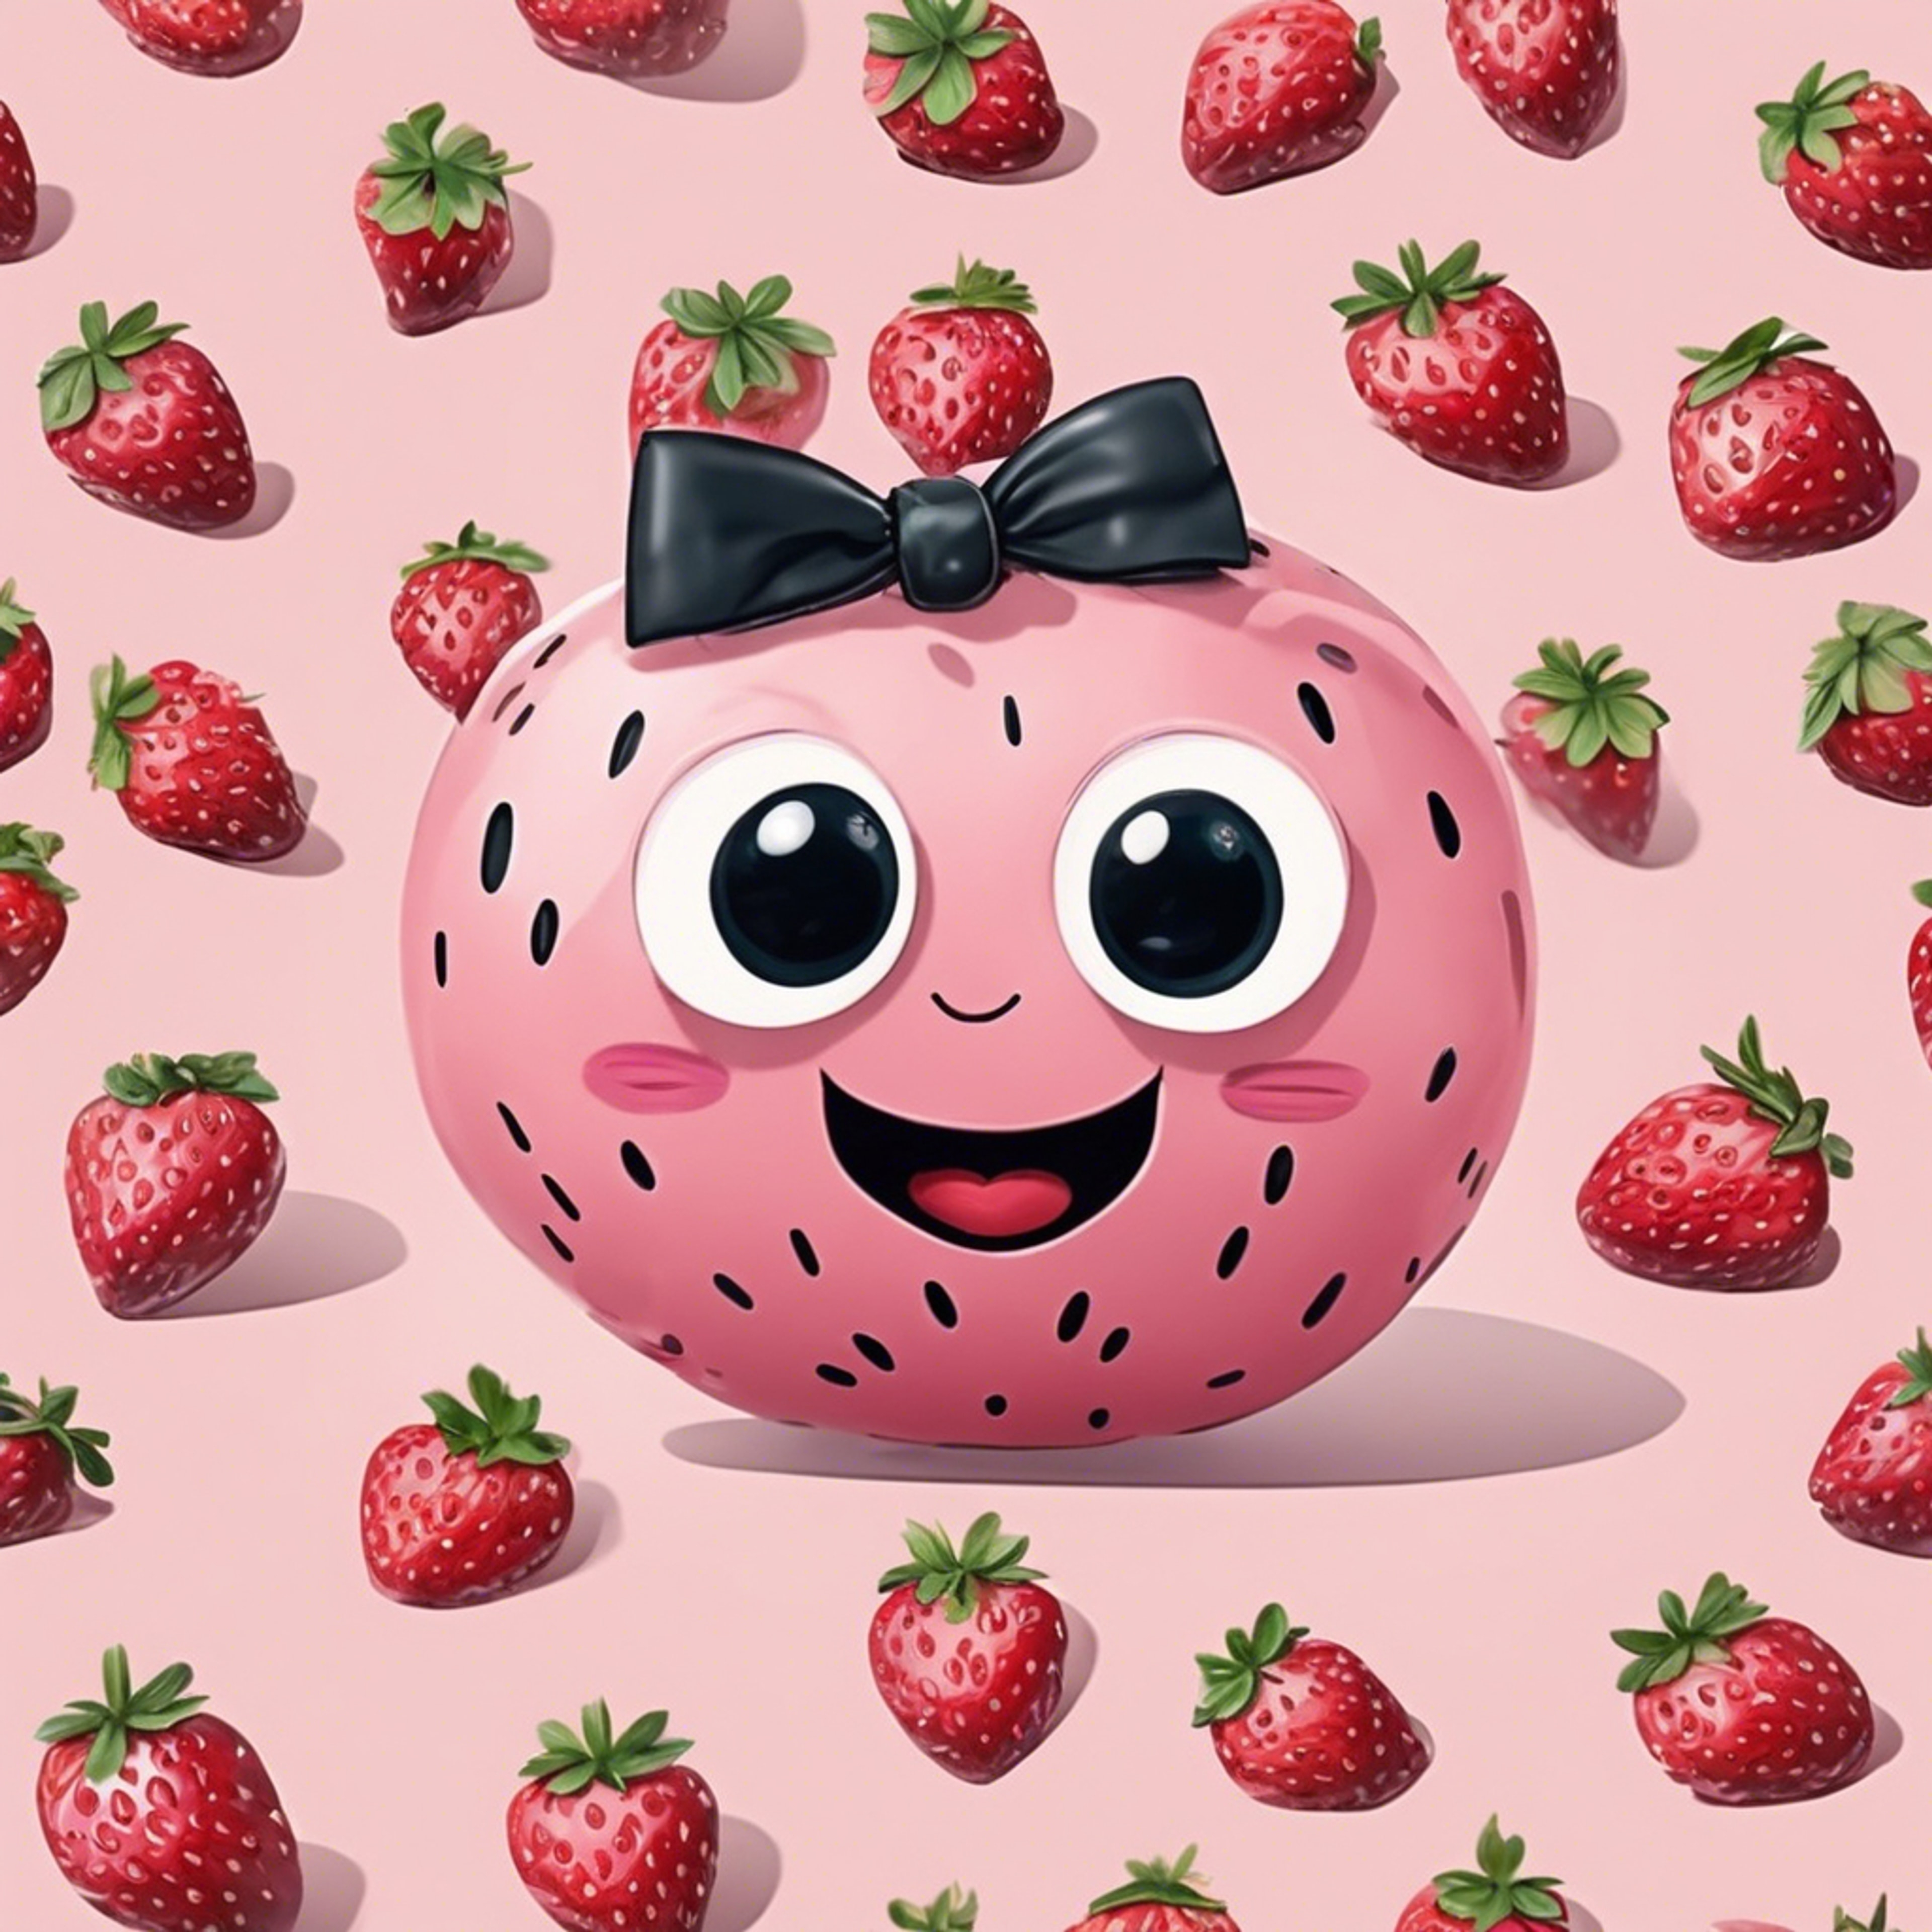 Cute, smiling light pink kawaii strawberries with big eyes and little bow ties. Tapeta[24a5e2efca874b08b7f4]